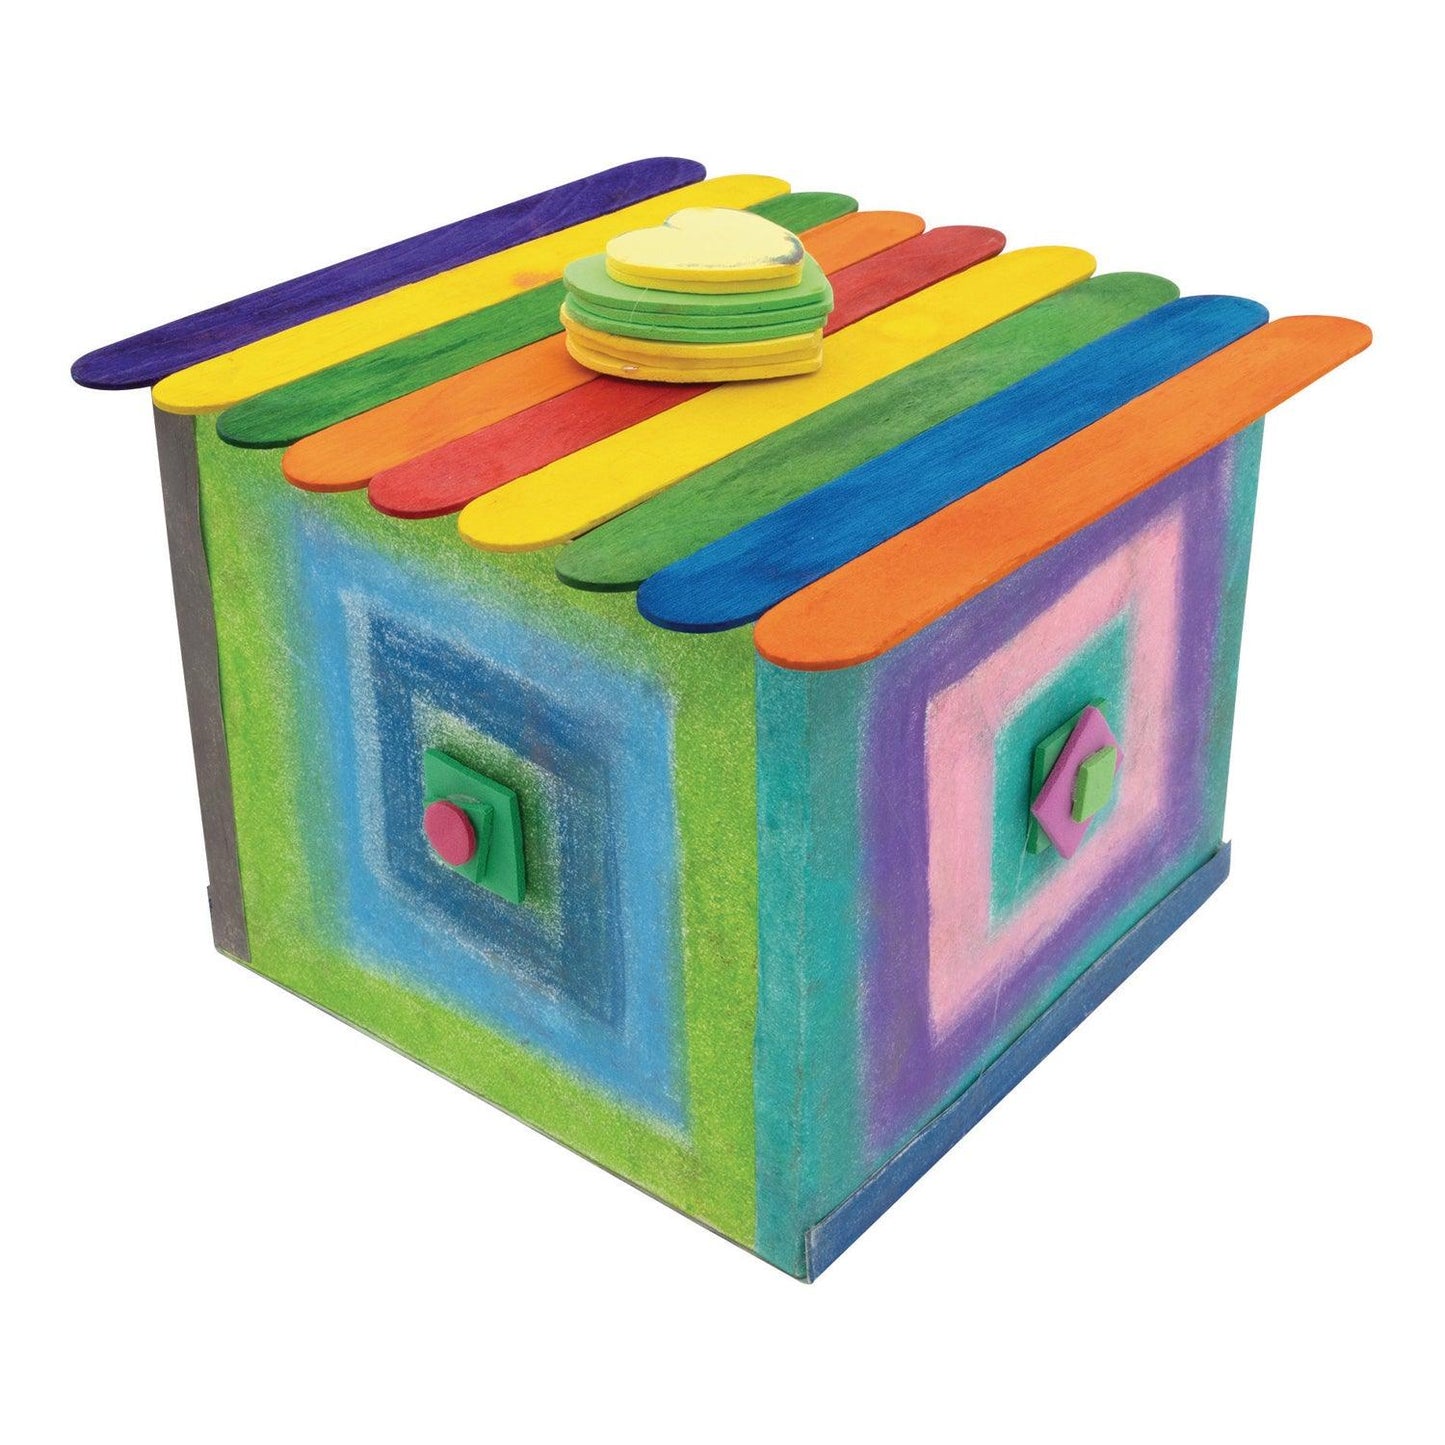 Square Artist Pastels, 24 Assorted Colors, 6 Each, 2-3/8" x 3/8" x 3/8", 144 Pieces - Loomini